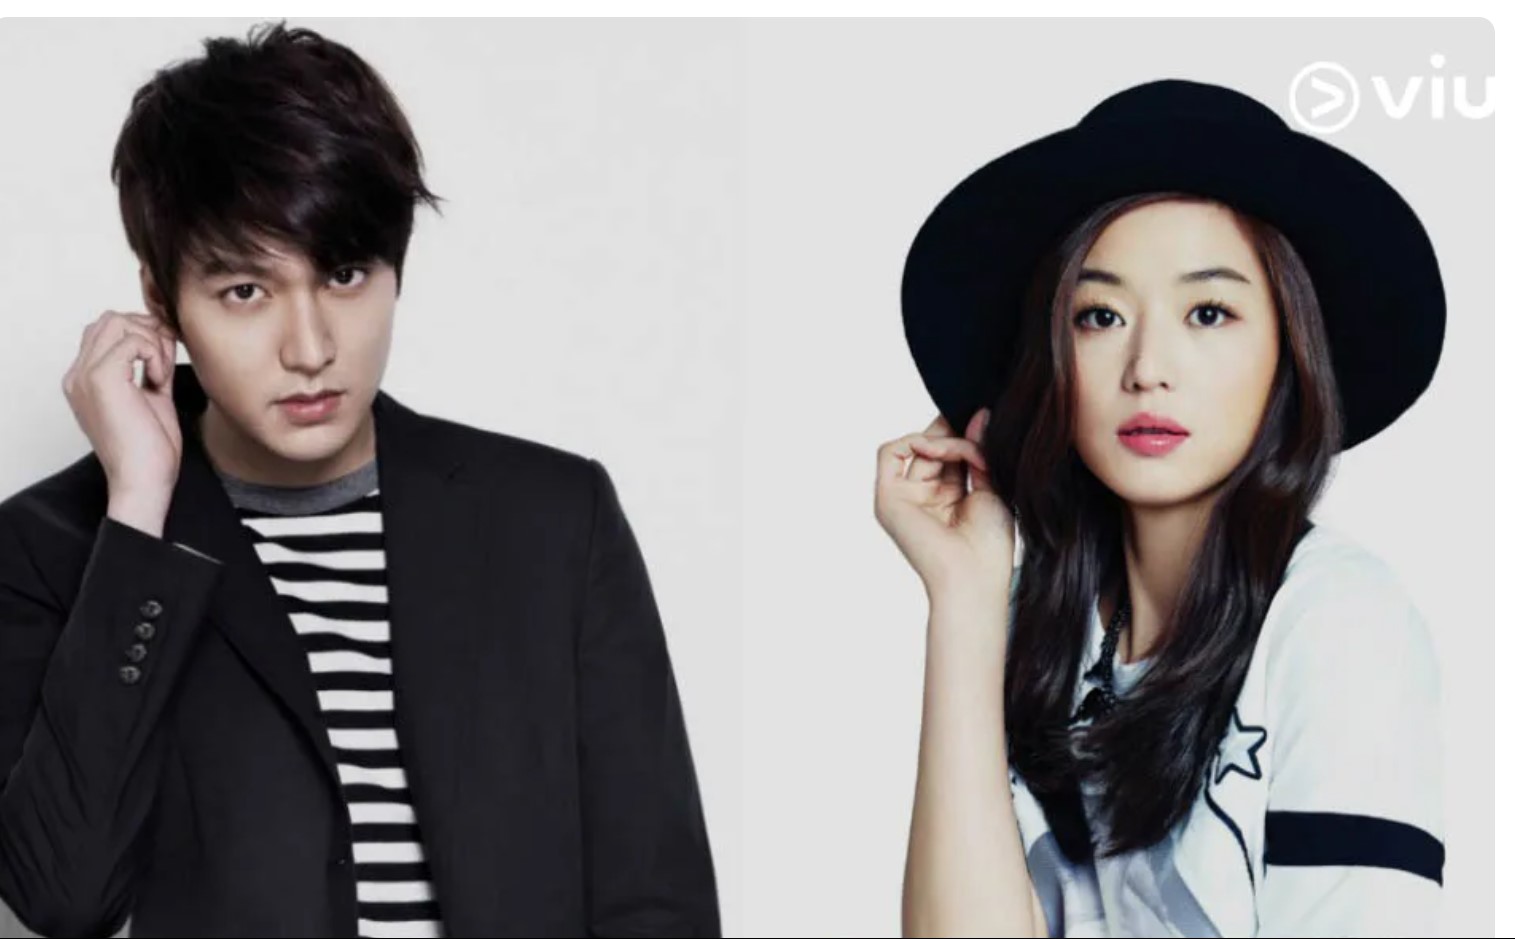 Lee Min Ho and Jun Ji Hyun to Star Together in Highly Anticipated Drama